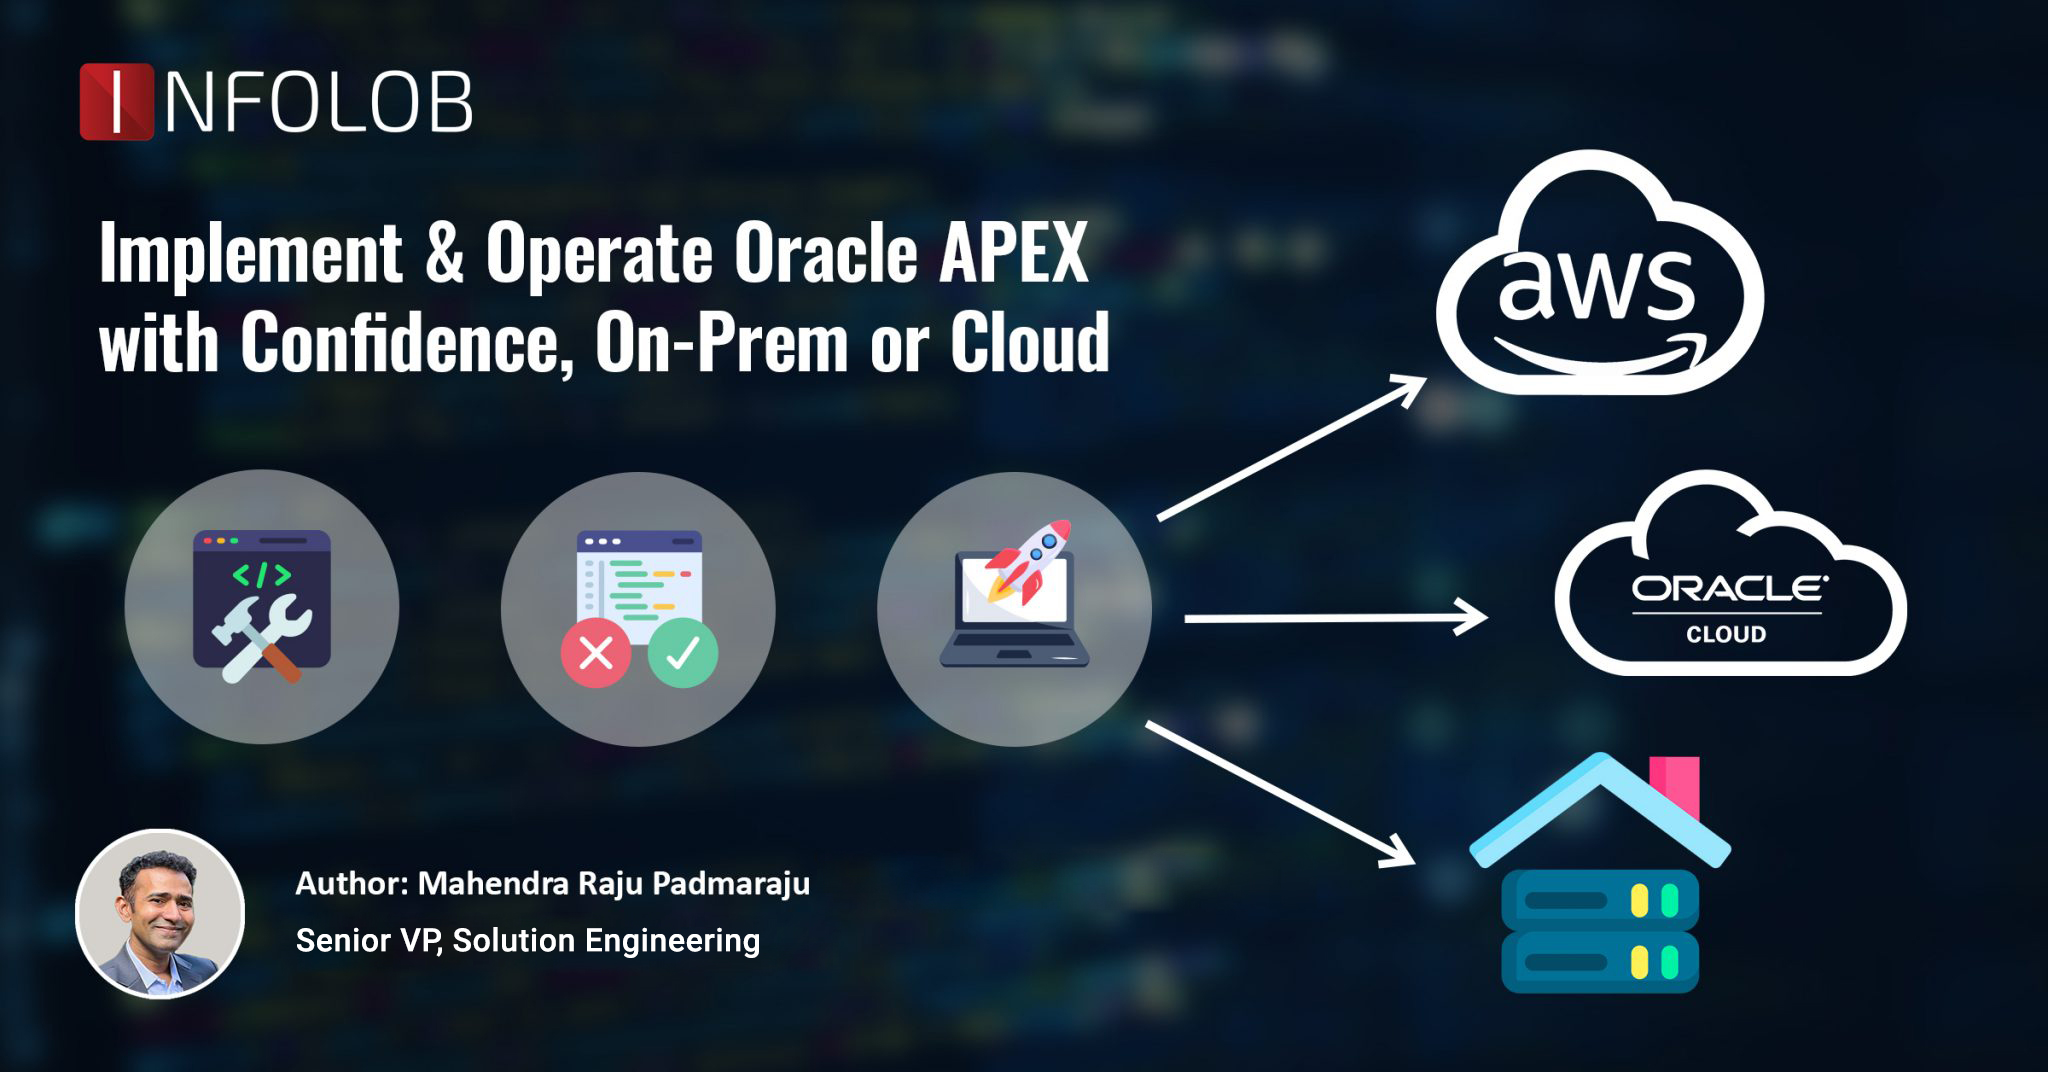 Premise or AWS to Oracle Cloud on October 10th at 12 PM CST! • INFOLOB  Global